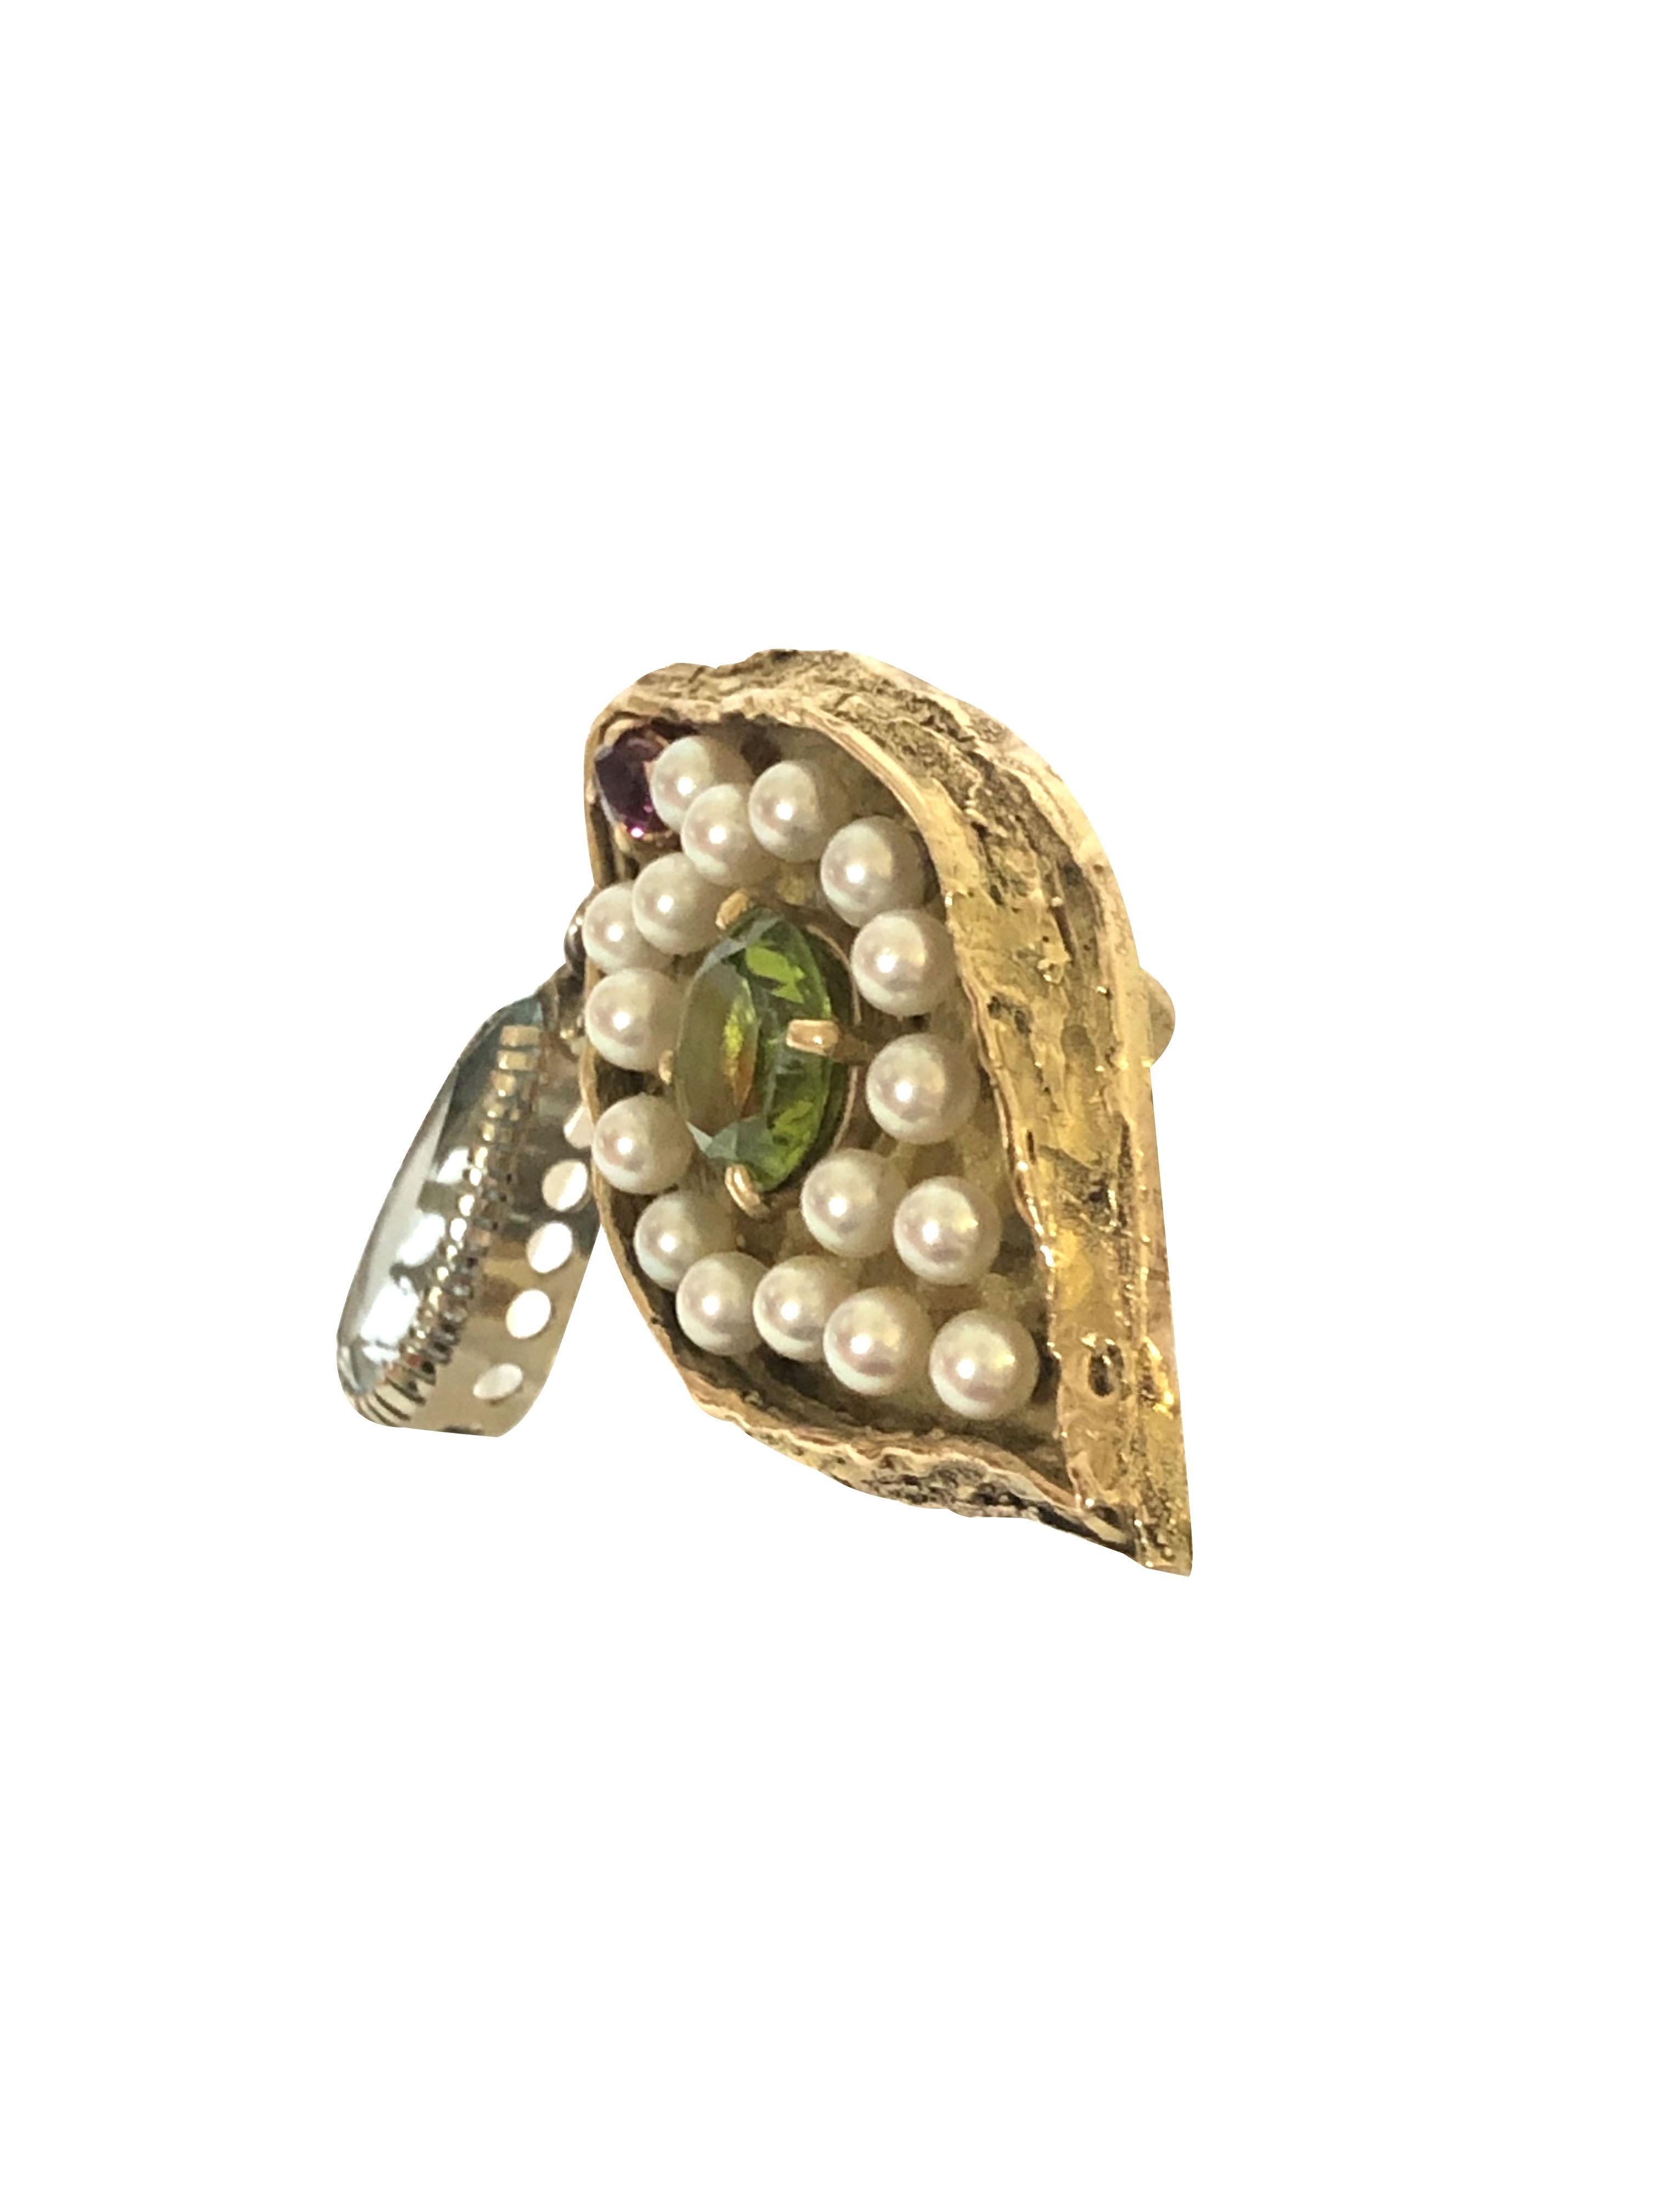 Circa 1970s Necklace Pendant in the Manner of Salvador Dali, this handmade piece measures 2 inches in length X 1 1/8 inch. Brilliantly made in hand formed and textured 14K Yellow Gold, centrally set with a Round Gem color Peridot of approximately 4